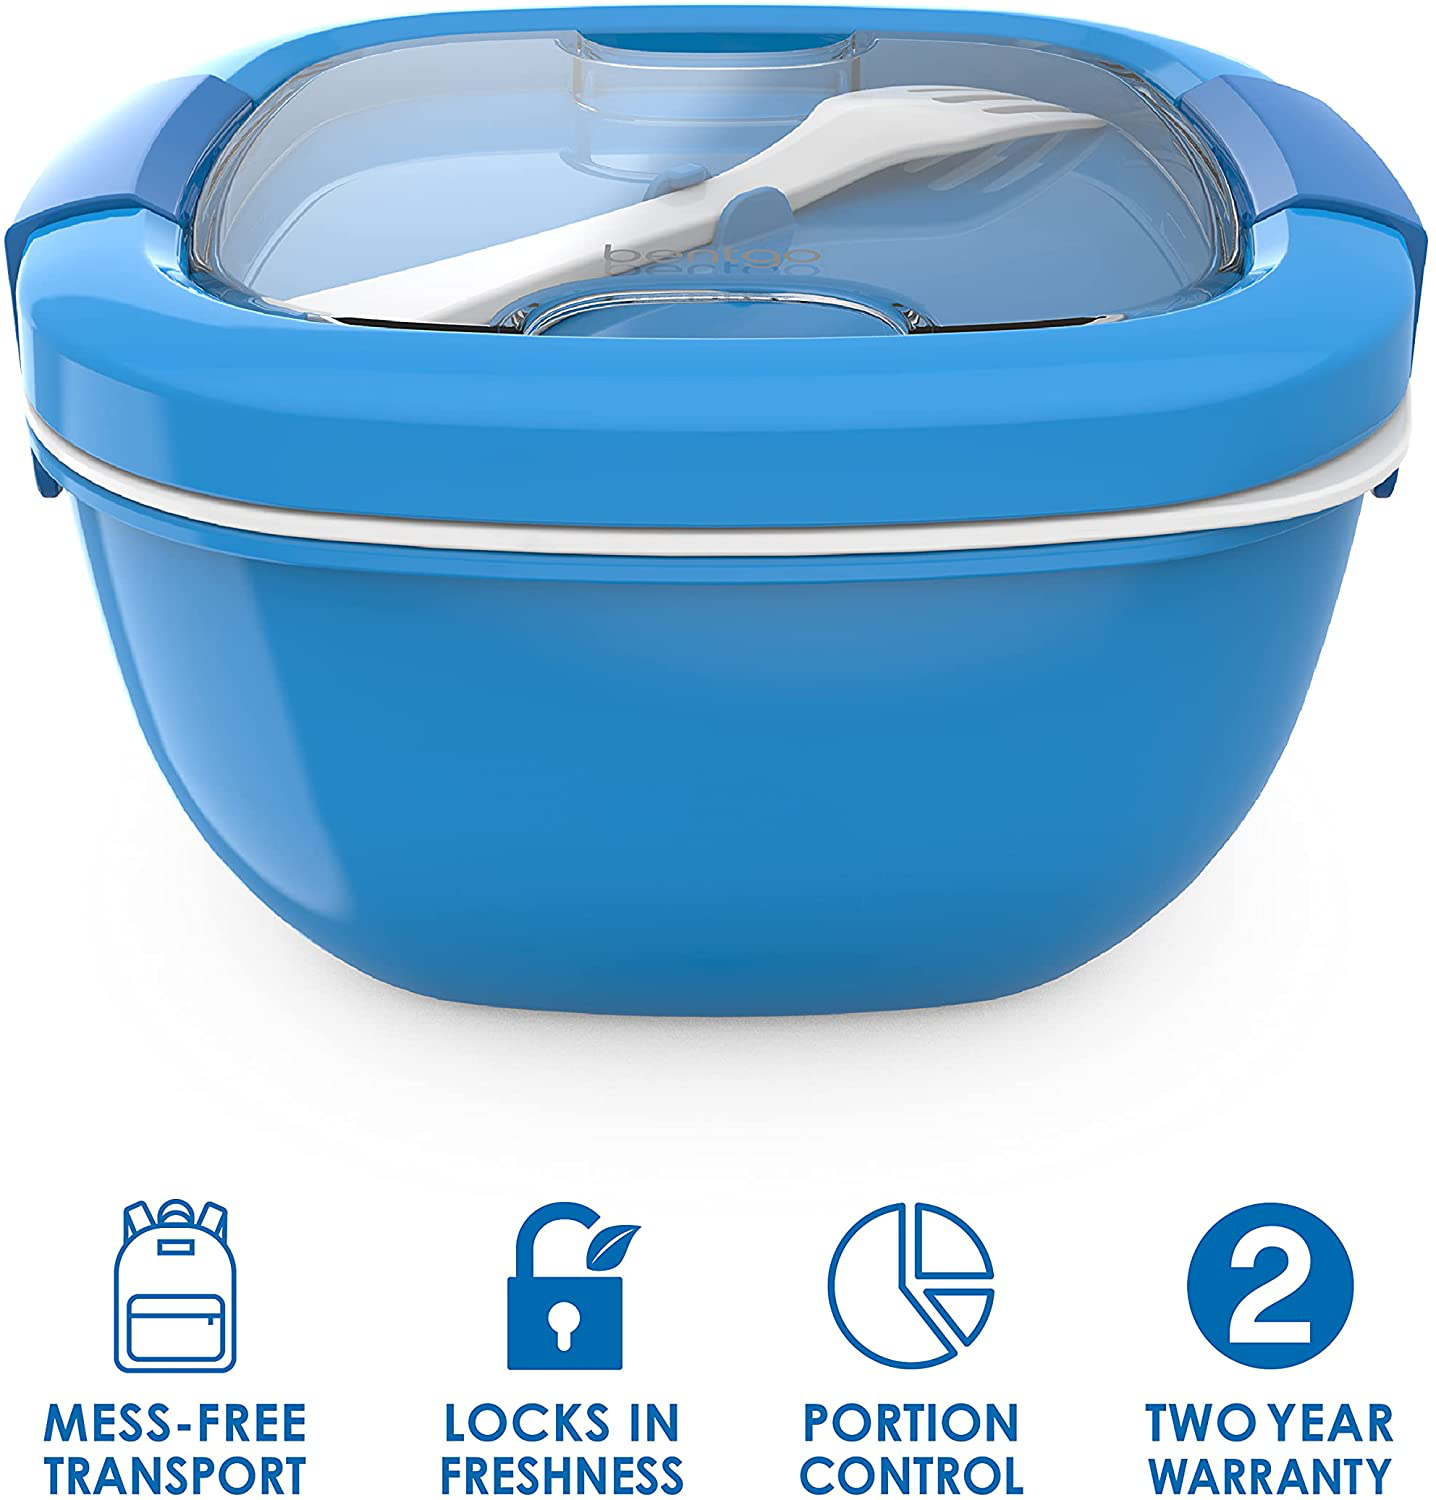 Bentgo Salad - Stackable Lunch Container with Large 54-oz Salad Bowl, 4-Compartment Bento-Style Tray for Toppings, 3-oz Sauce Container for Dressings, Built-In Reusable Fork & BPA-Free (Blue)